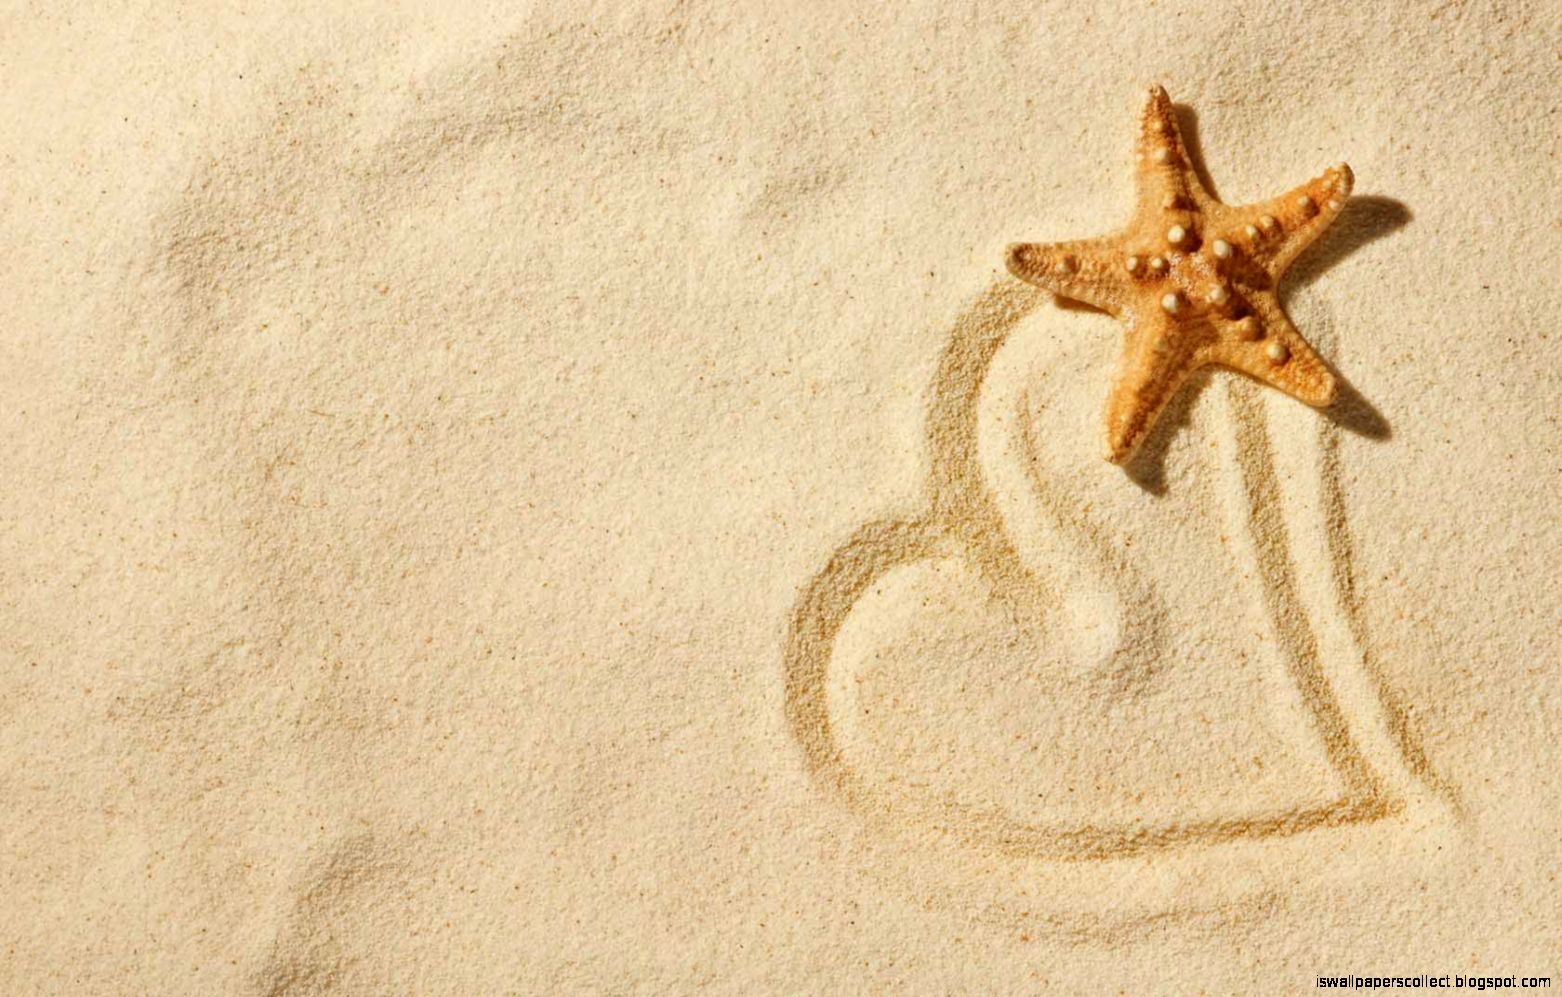 Beach Pictures With Starfish | Wallpapers Collection